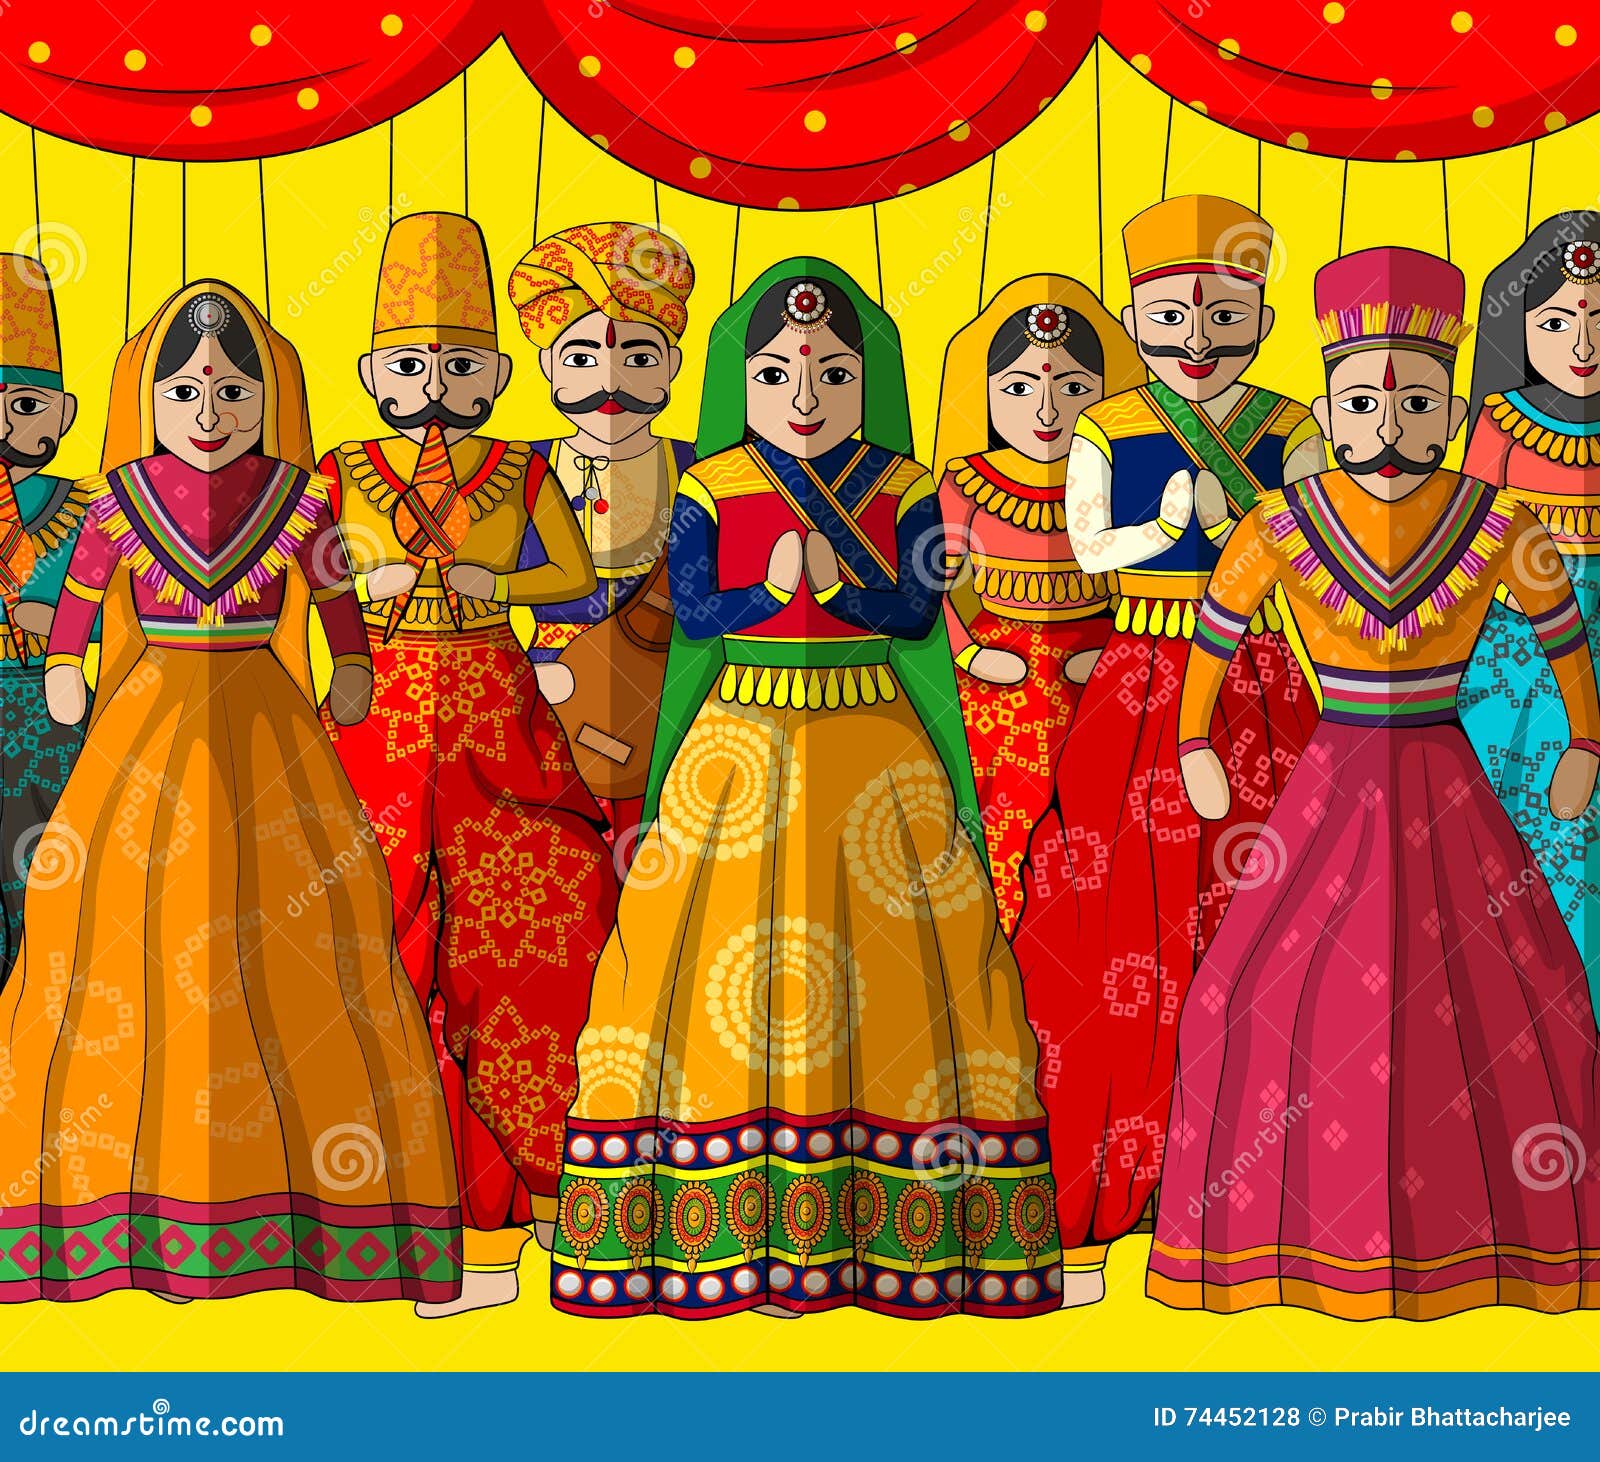 rajasthani puppet in indian art style